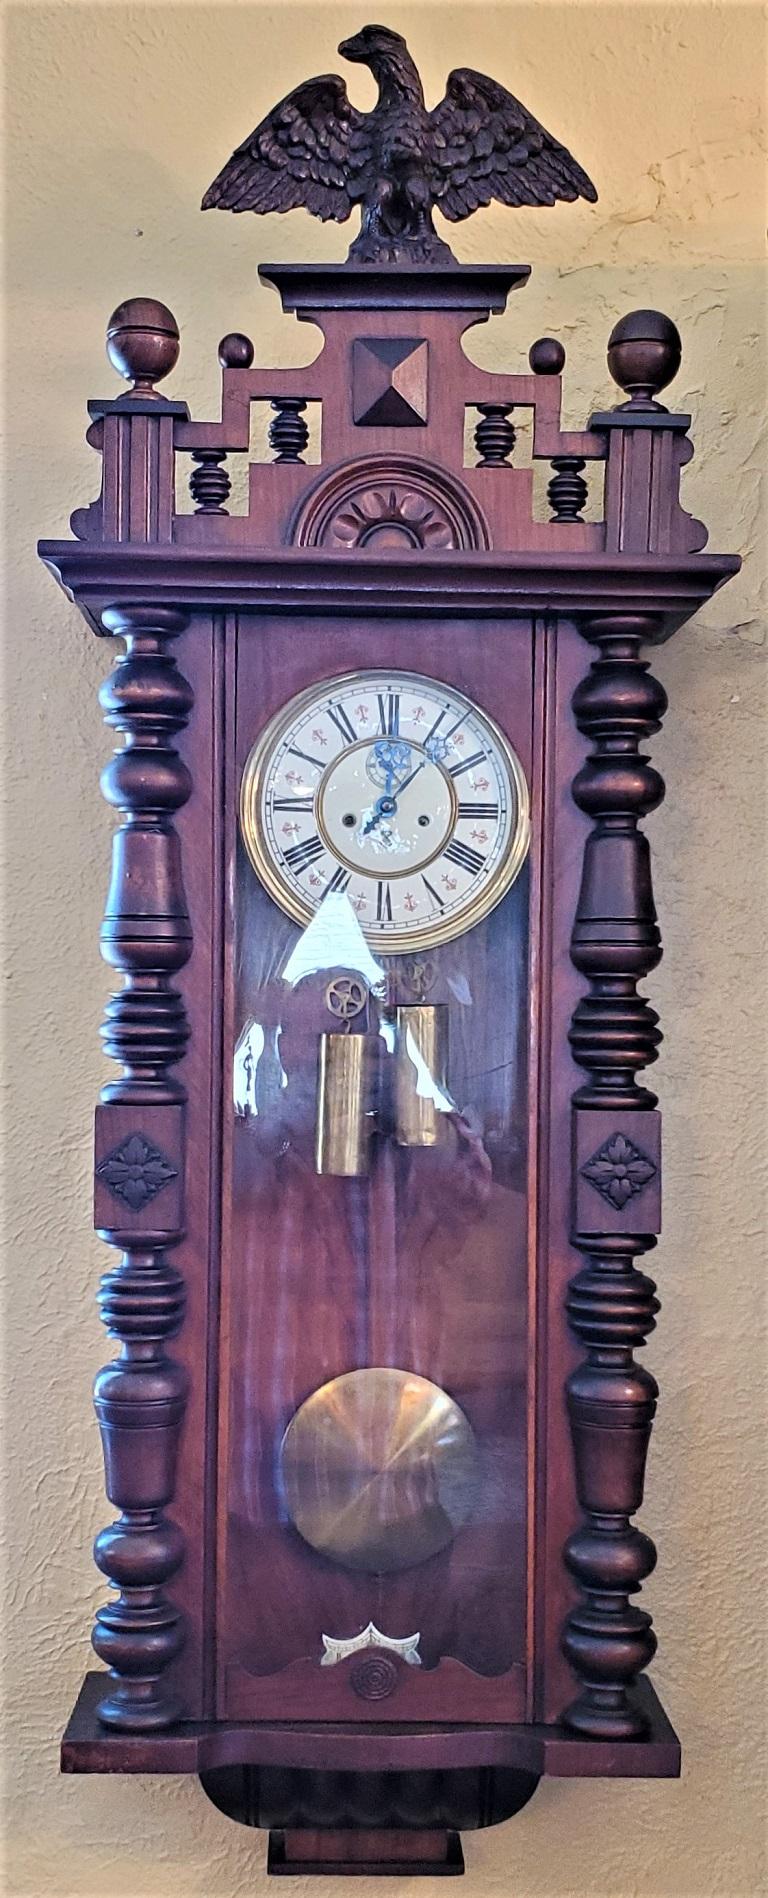 PRESENTING A GORGEOUS 19C Gustav Becker Vienna Wall Clock.

Made by the famous clockmaker, Gustav Becker circa 1880 in Germany.

The Clock, is in good original and untouched condition.

The removeable pelmet has an eagle on top which is marked on